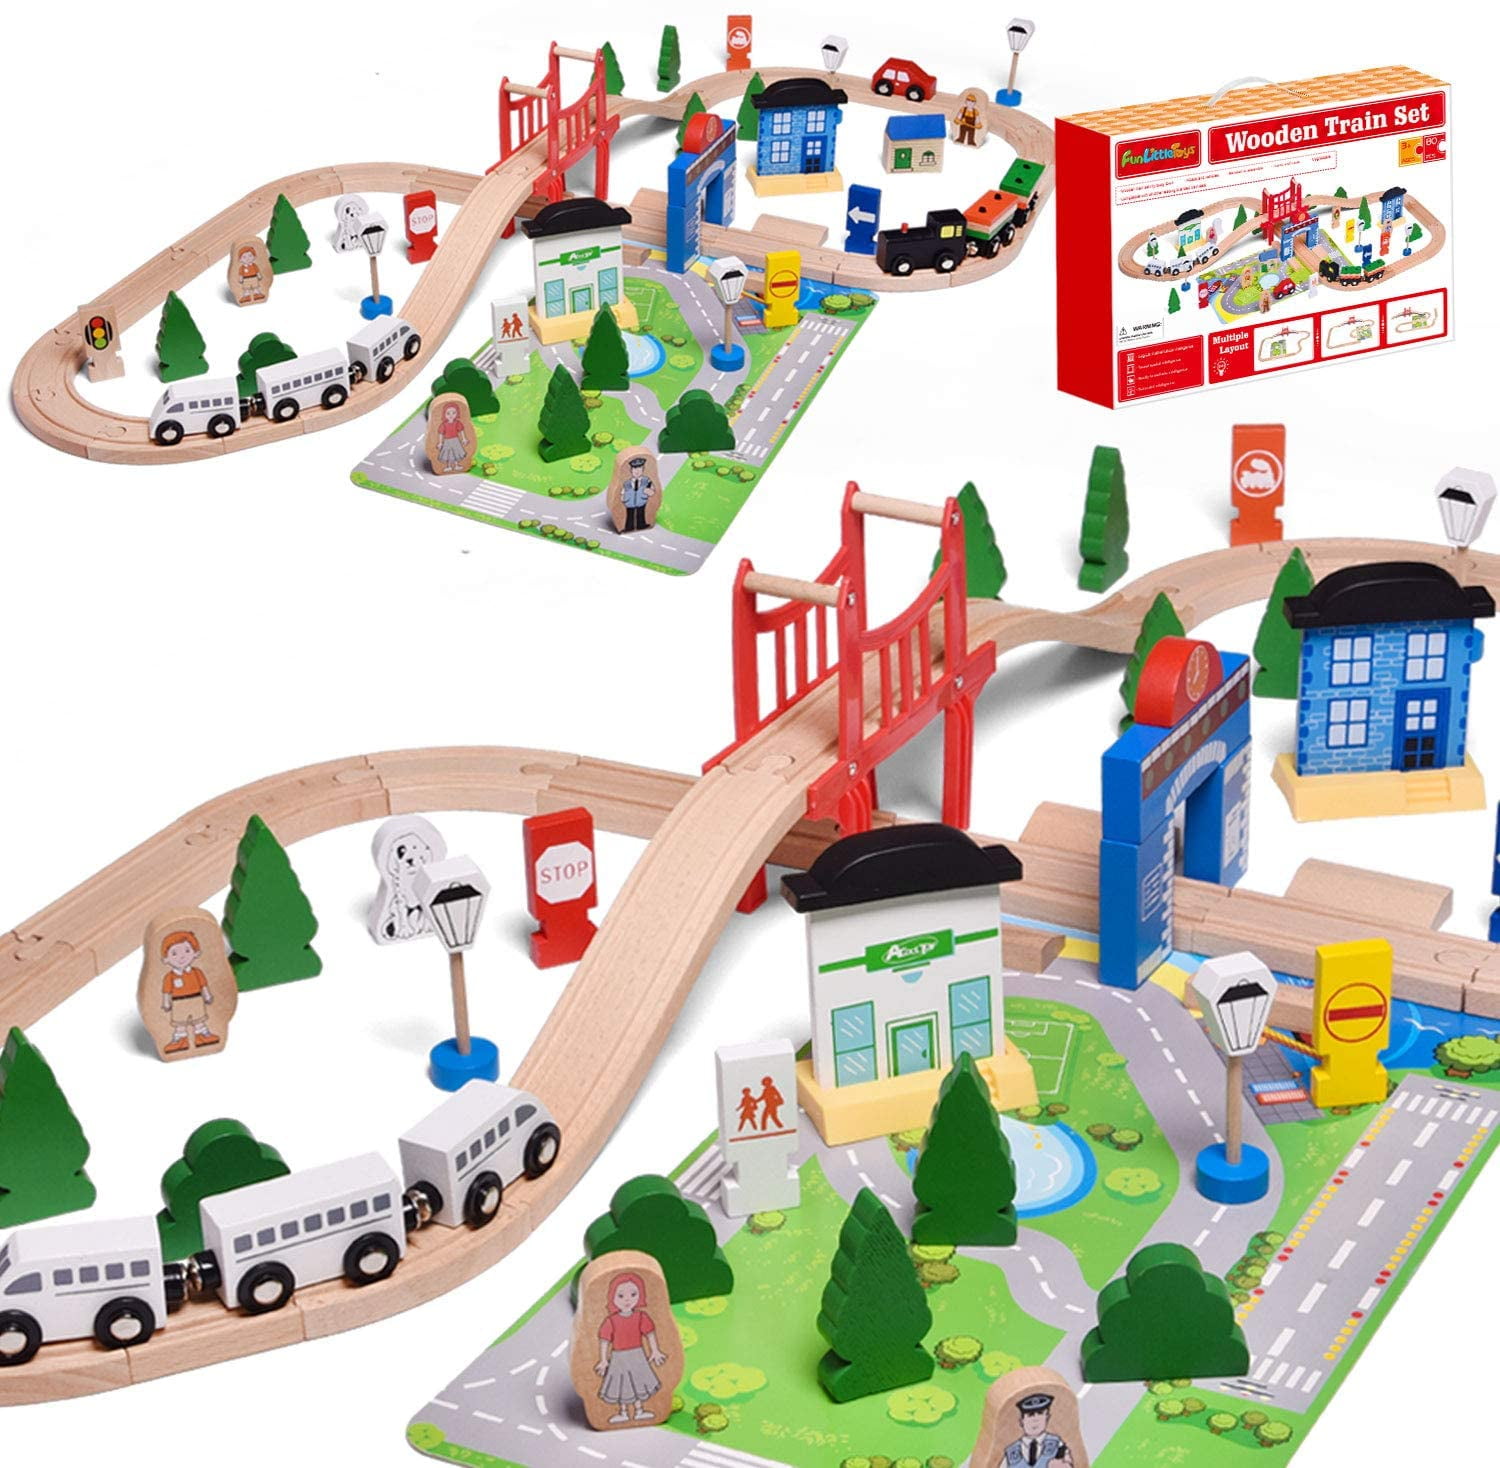 Wooden Train Track Accessories Set Kids DIY Railway Assembly Building Toy 